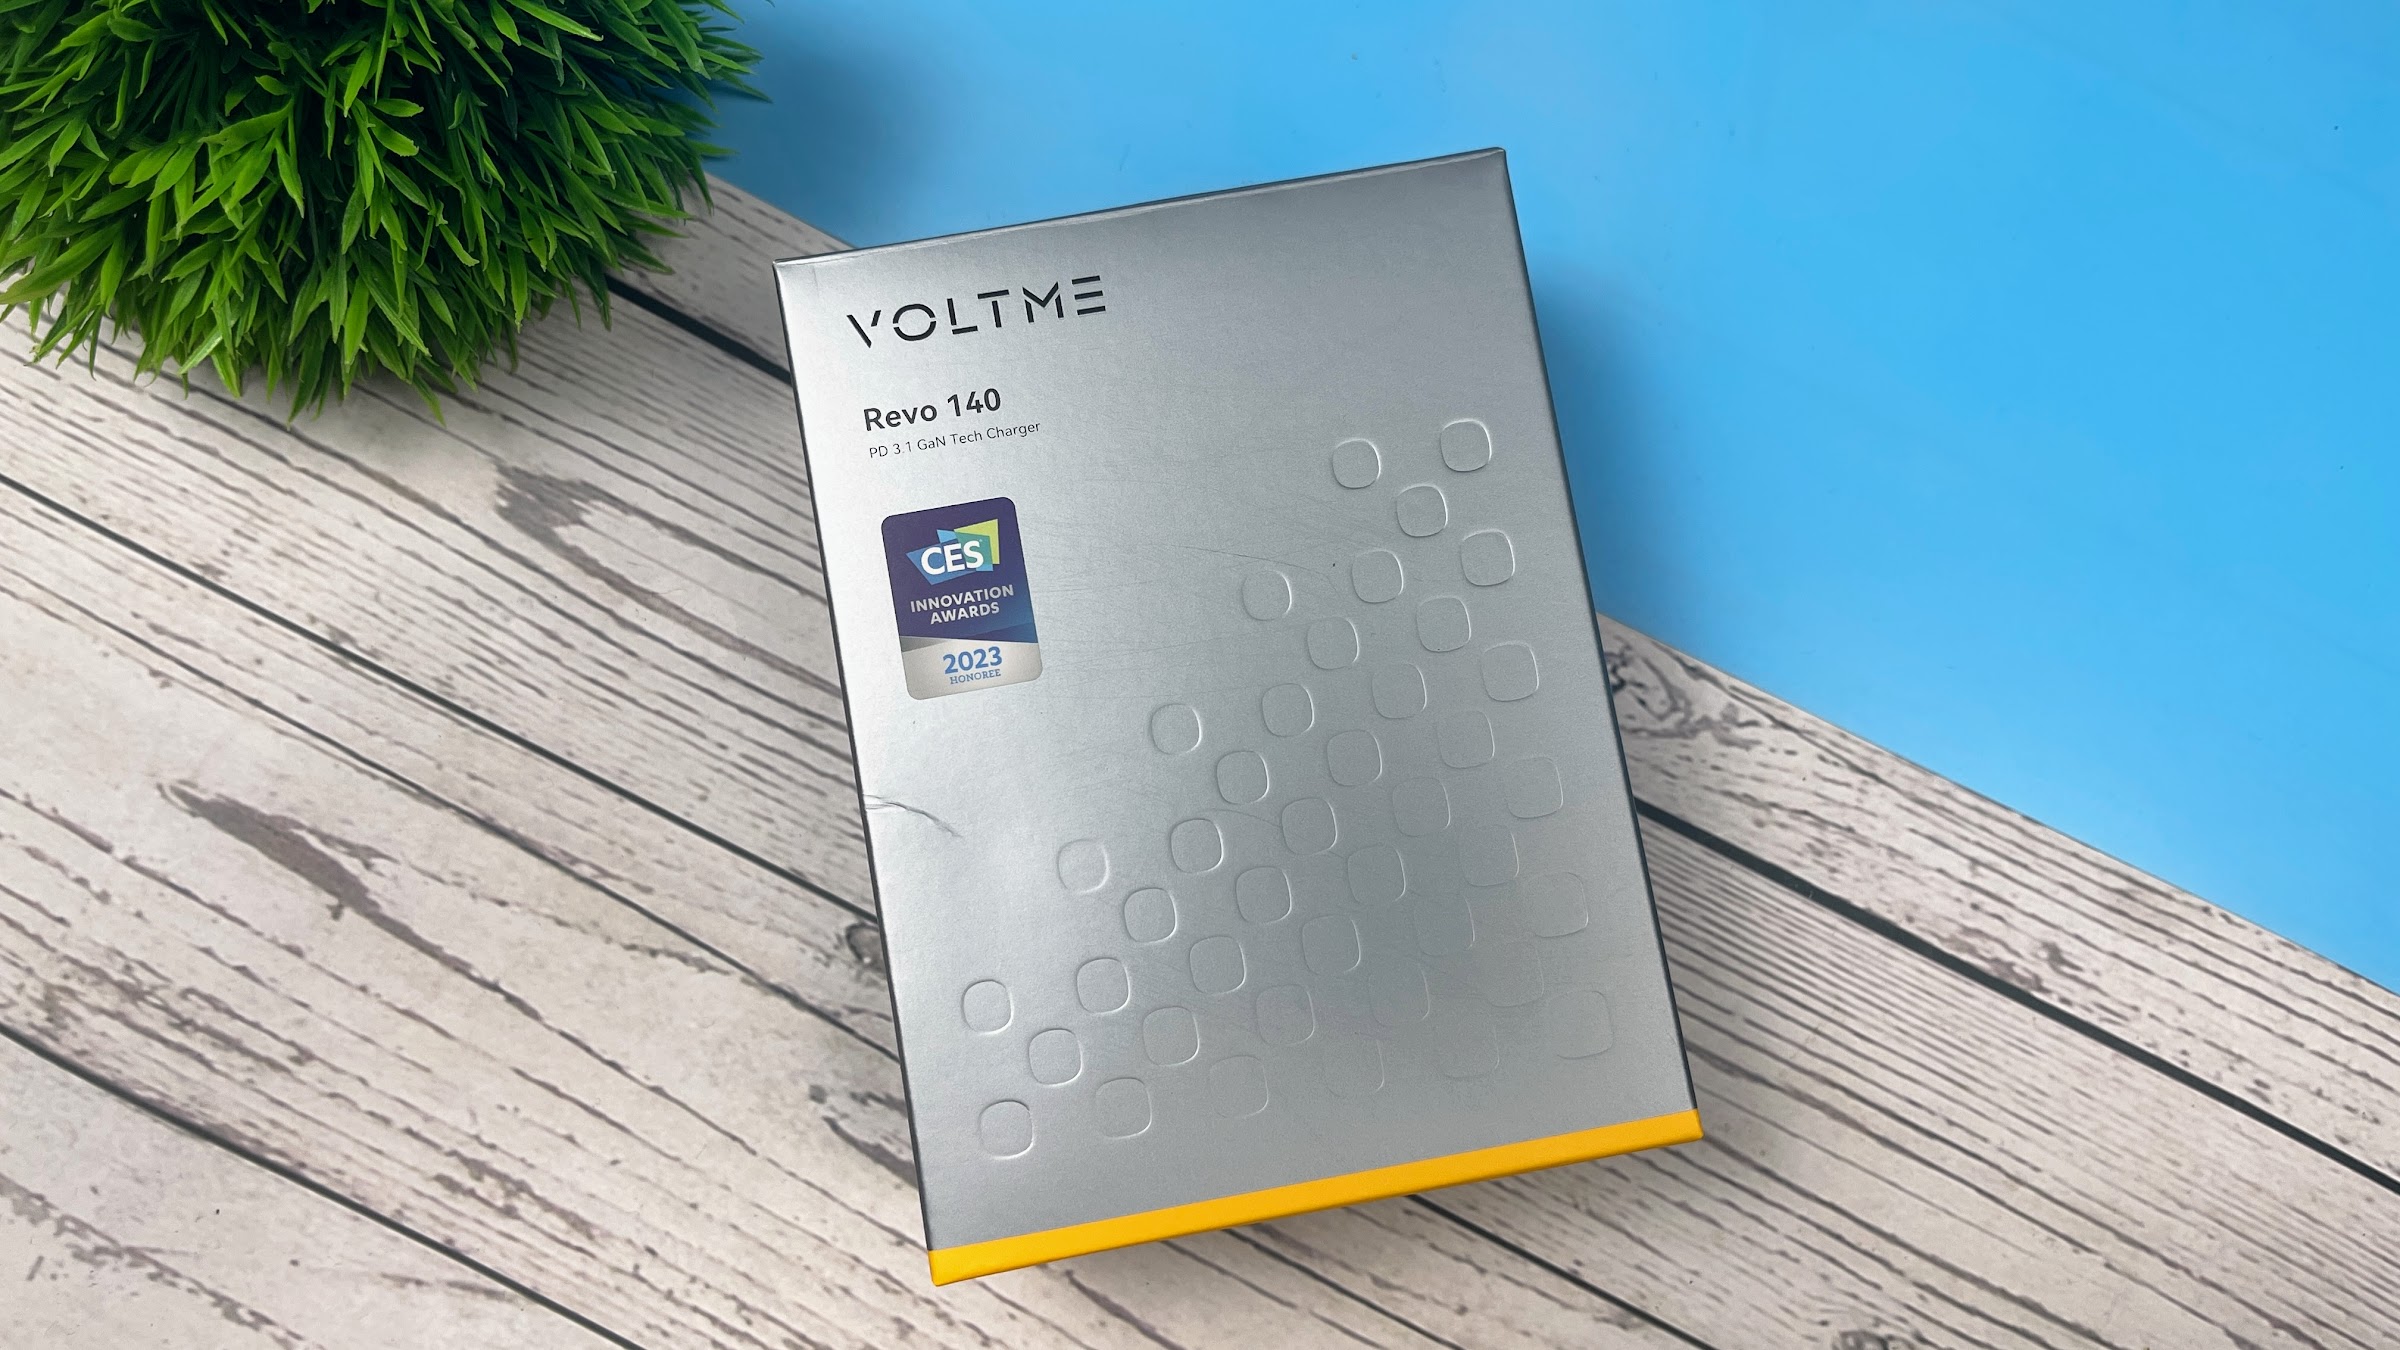 VOLTME Revo 140W PD 3.1 GaN Fast Charger Review - The All-in-One Charging Solution for Gadgets